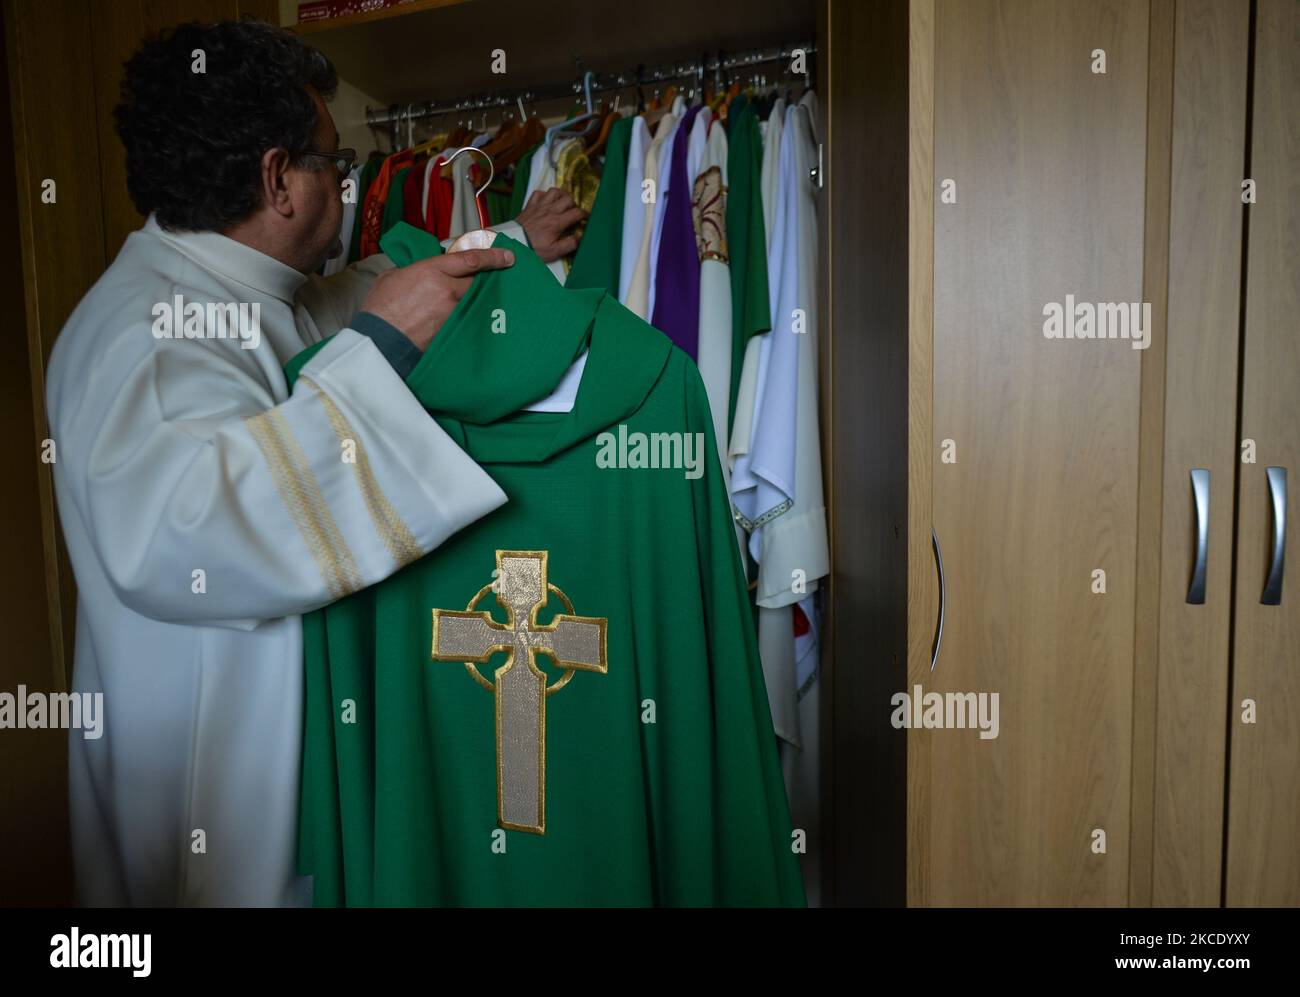 Father Krzysztof Sikora inspects the chasuble in the sacristy of the Roman Catholic Church 'Our Lady Star Of The Sea' in Roundstone, Connemara. Geographically, Roundstone parish is considered Ireland's largest parish and stretches from the Gurteen Beaches to the Twelve Bens and Mám Tuirc Mountains. Until the 1990s, the parish was served by three priests, now there is only one to look after five churches. The current Parish Priest, a Polish born Fr Krzysztof Sikora, is a member of the religious congregation of the Divine Word Missionaries. After years of working as a missionary in the Philippin Stock Photo